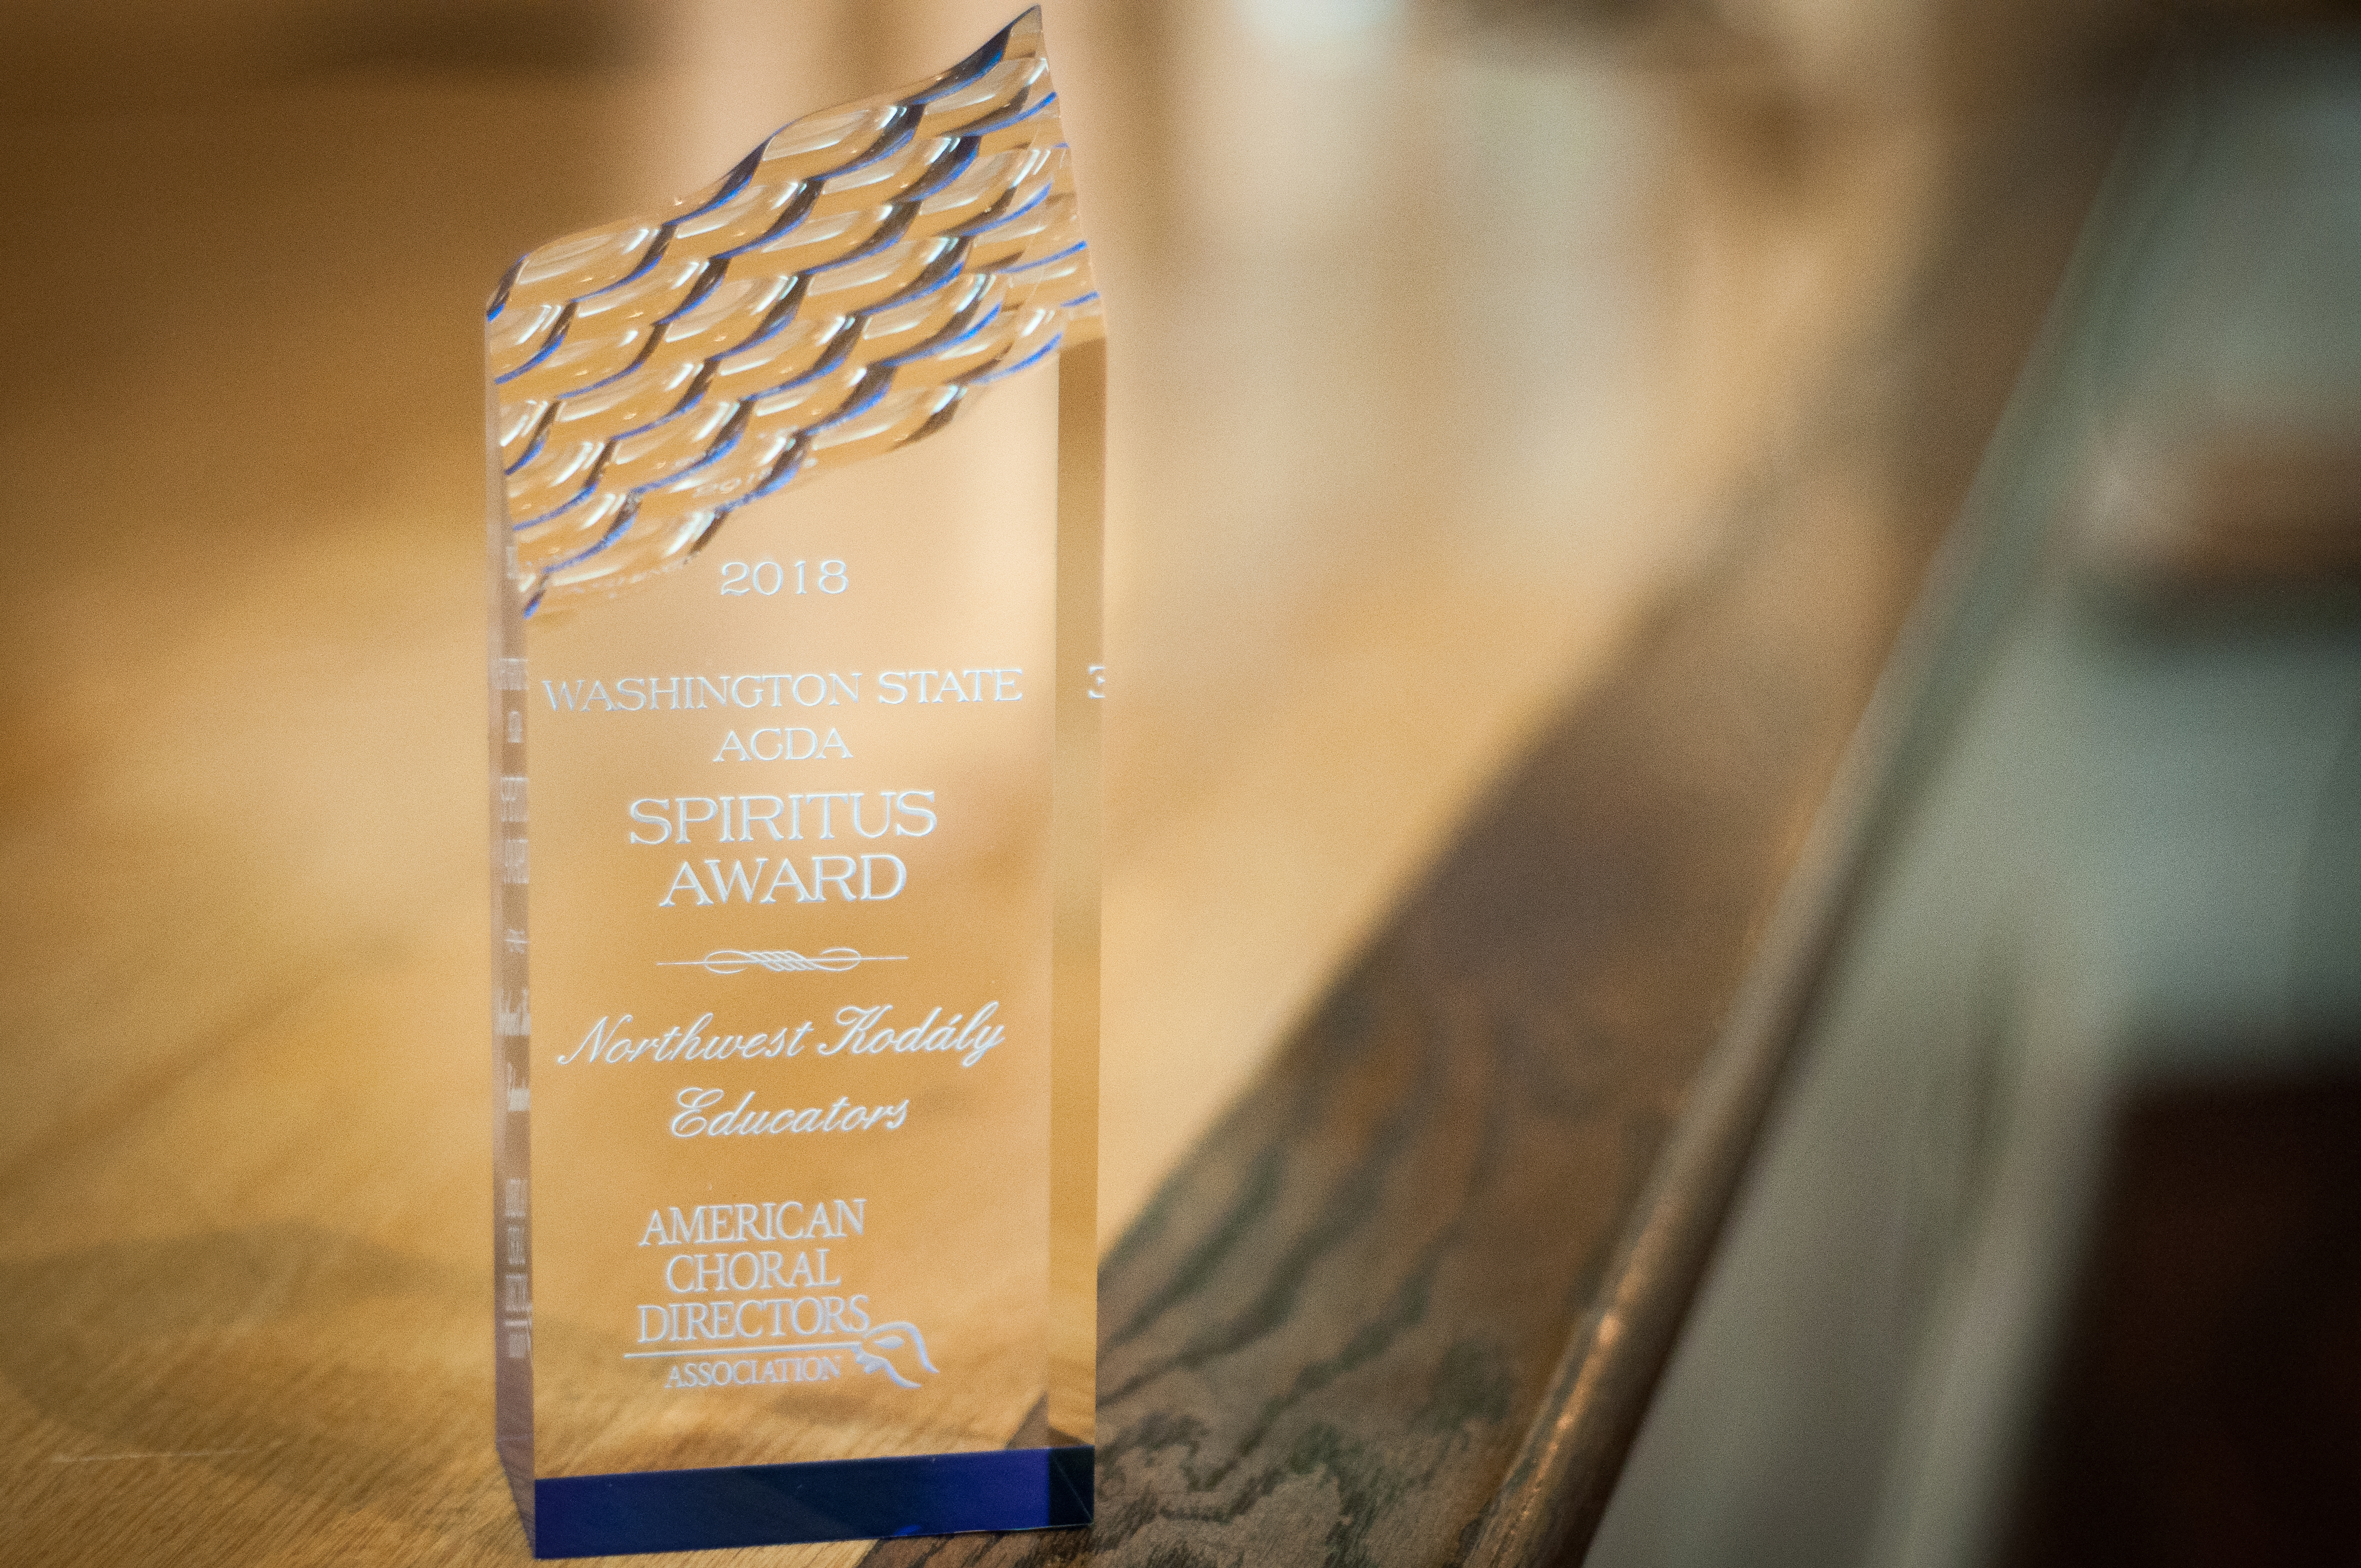 This image is a picture of the Spiritus Award given to NWKE by Washington State ACDA for our significant contribution to choral music in Washington State. The award is a glass prism with an angled top that has a wavy texture. The text on the award reads "2018 Washington State ACDA Spiritus Award - Northwest Kodály Educators - American Choral Directors Association."